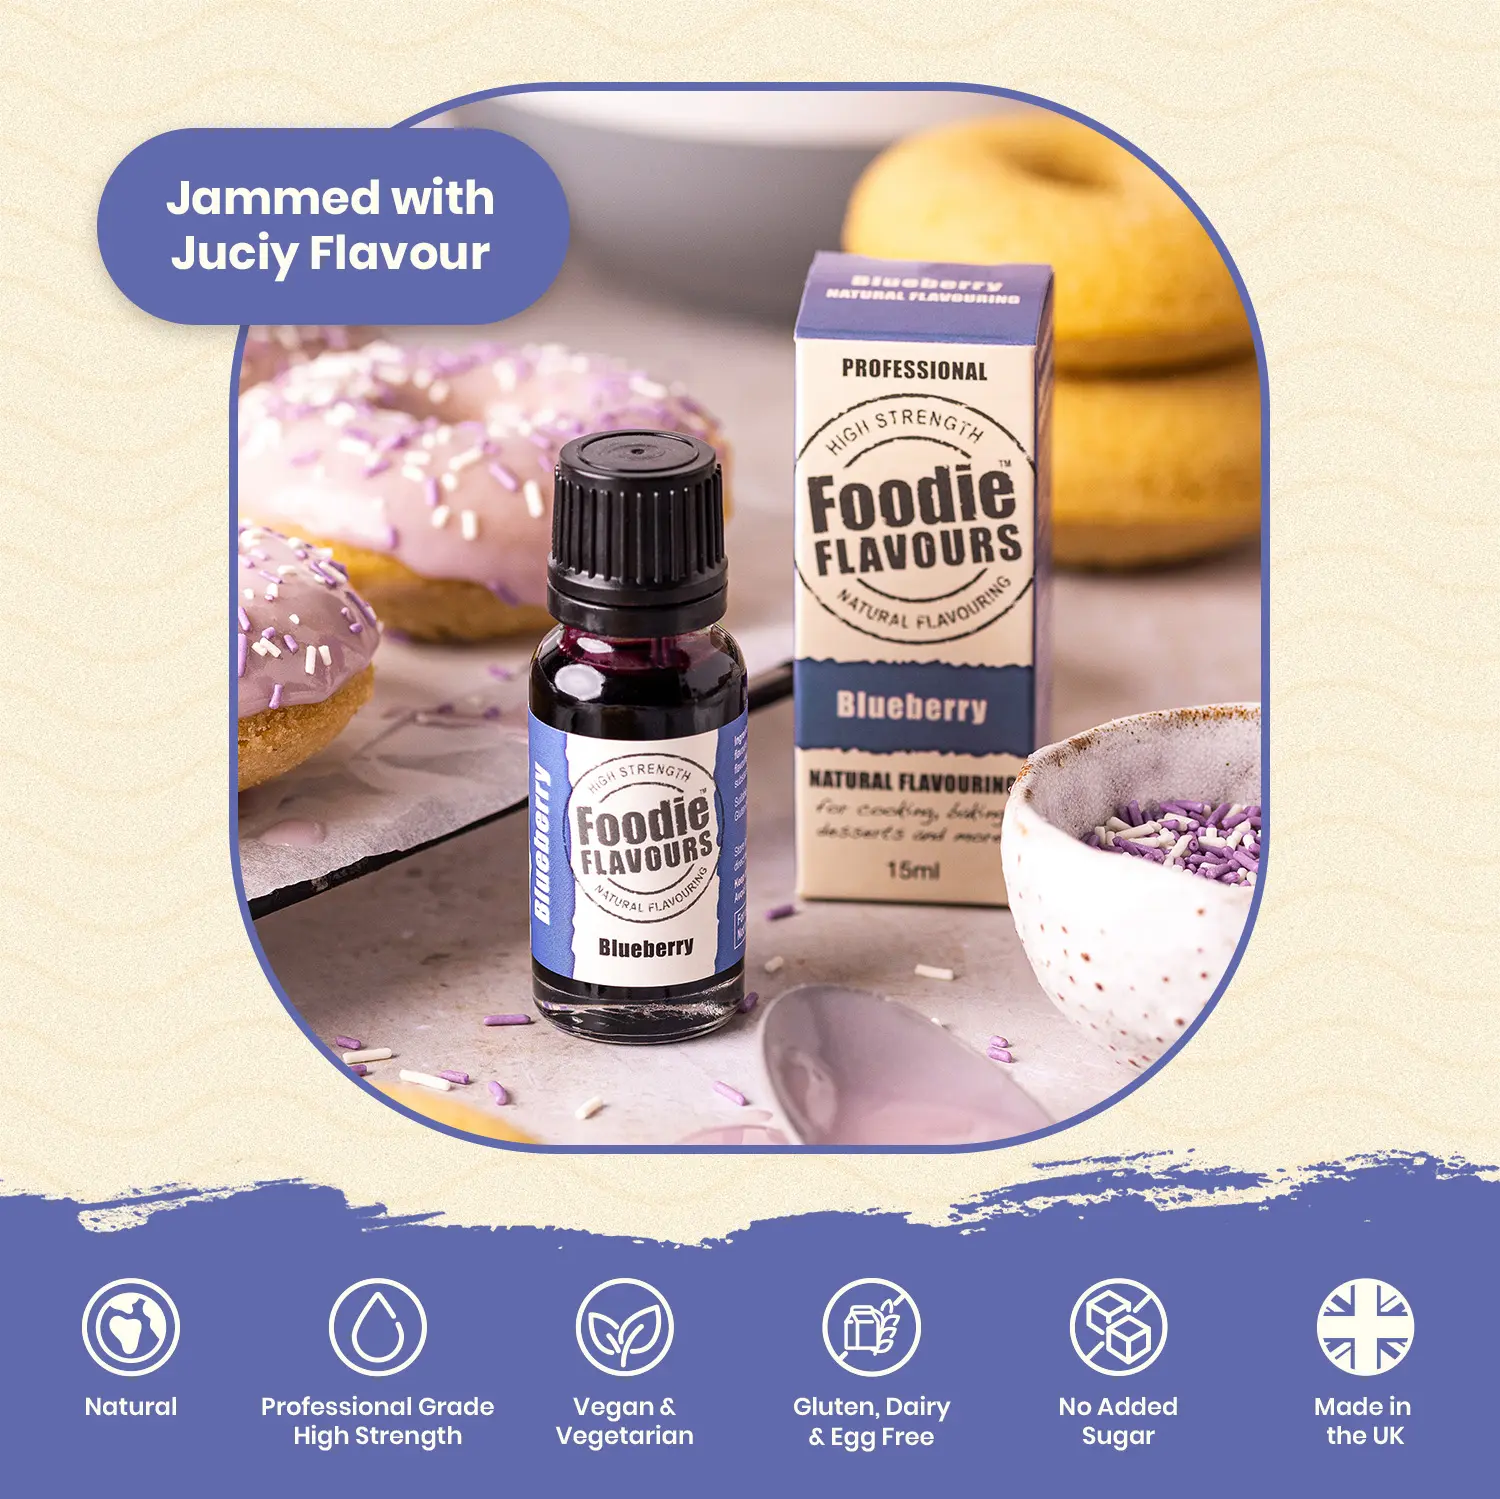 Blueberry Natural Flavouring - features